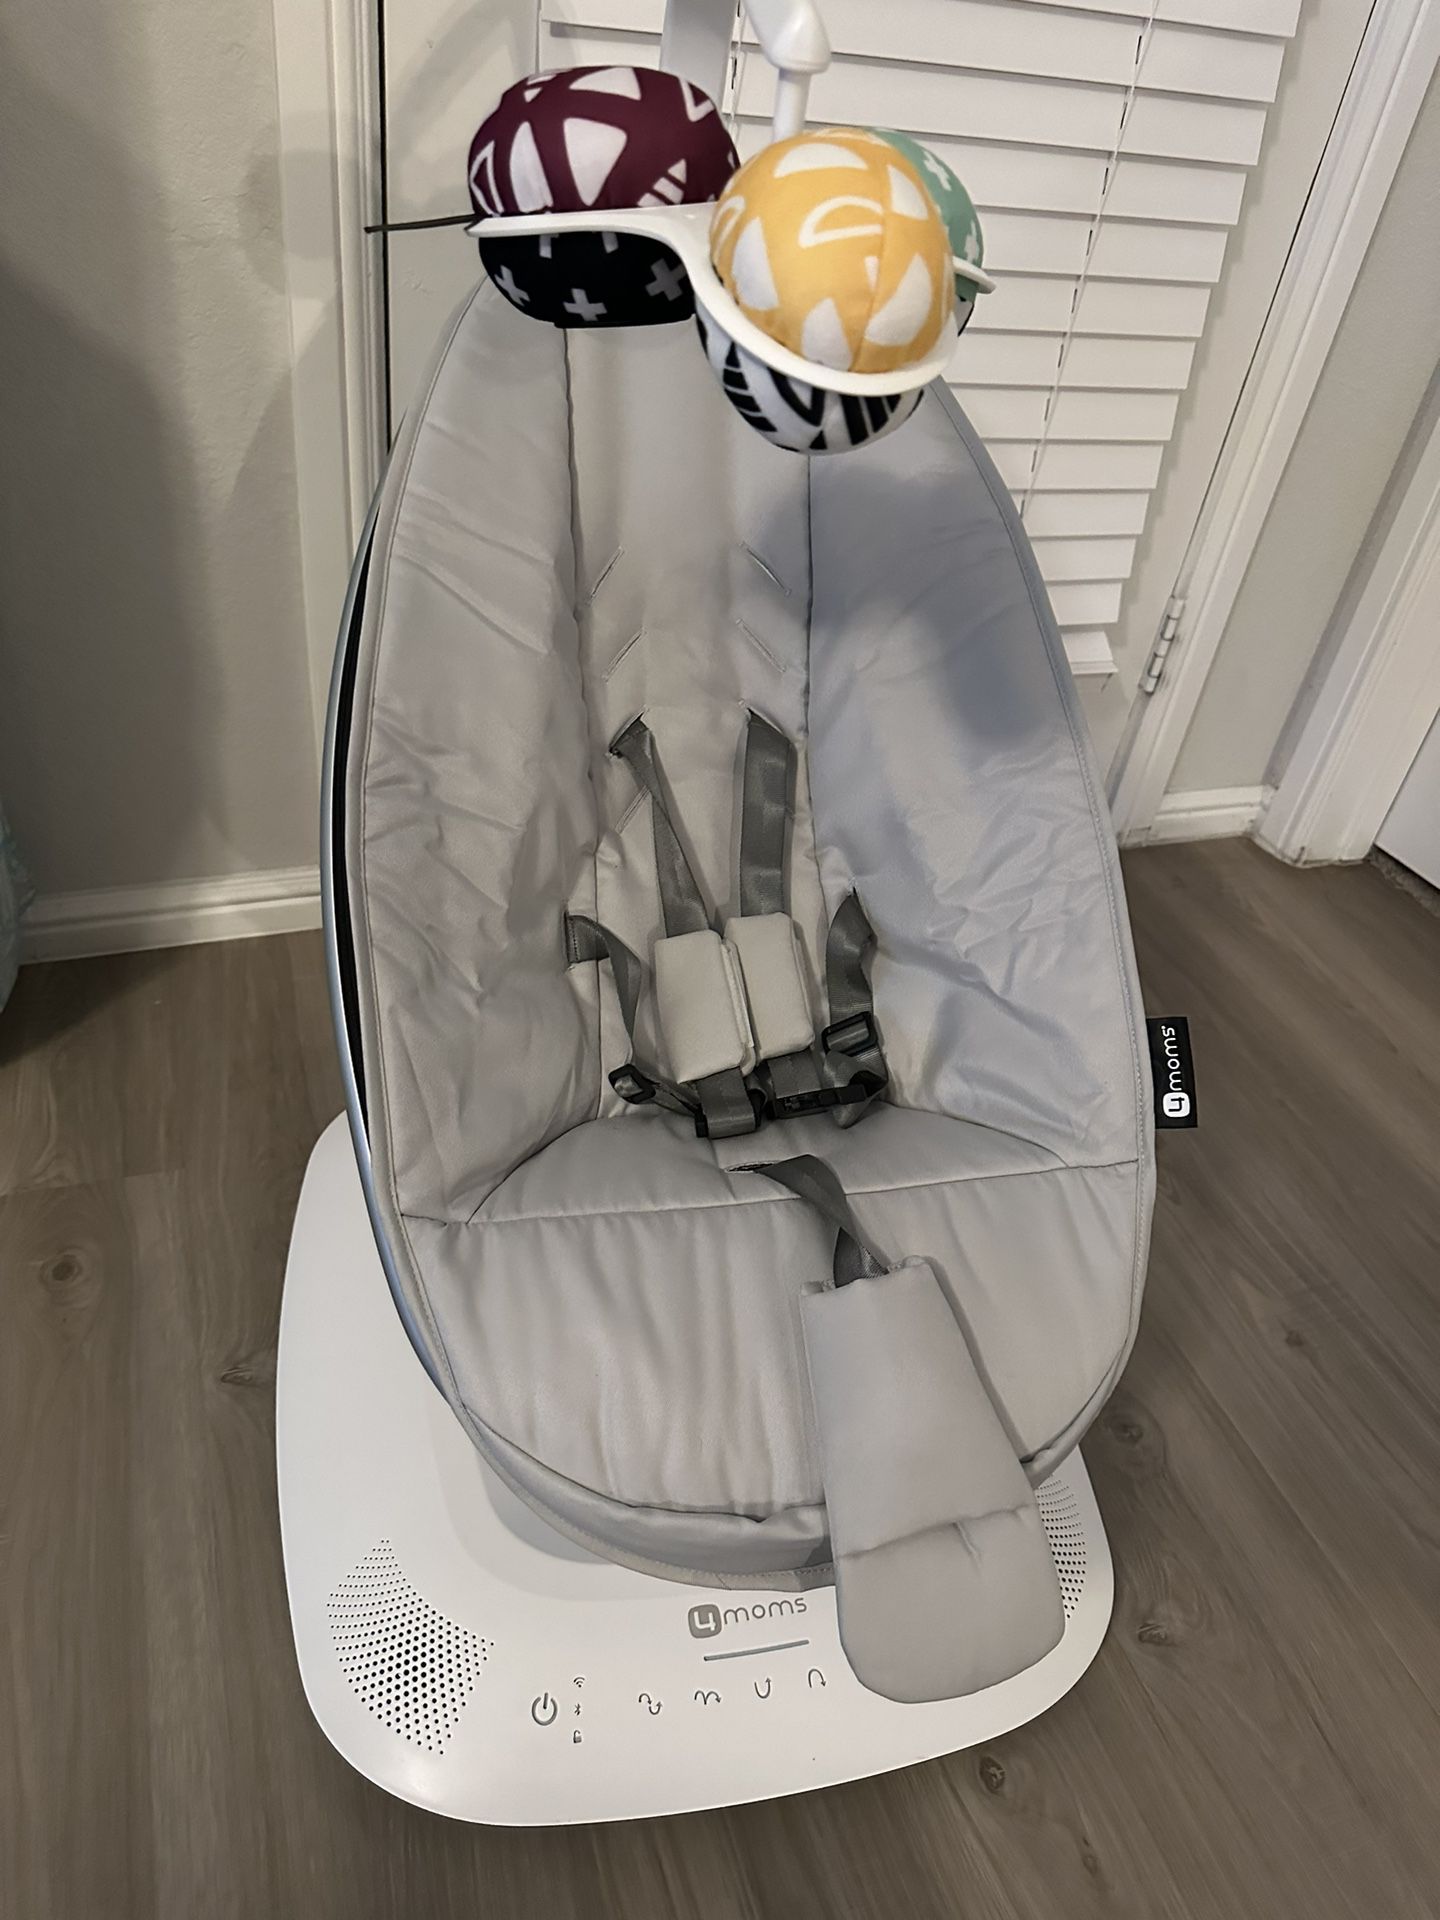 4moms MamaRoo Multi-Motion Baby Swing , Bluetooth Enabled With Unique Motions, Grey